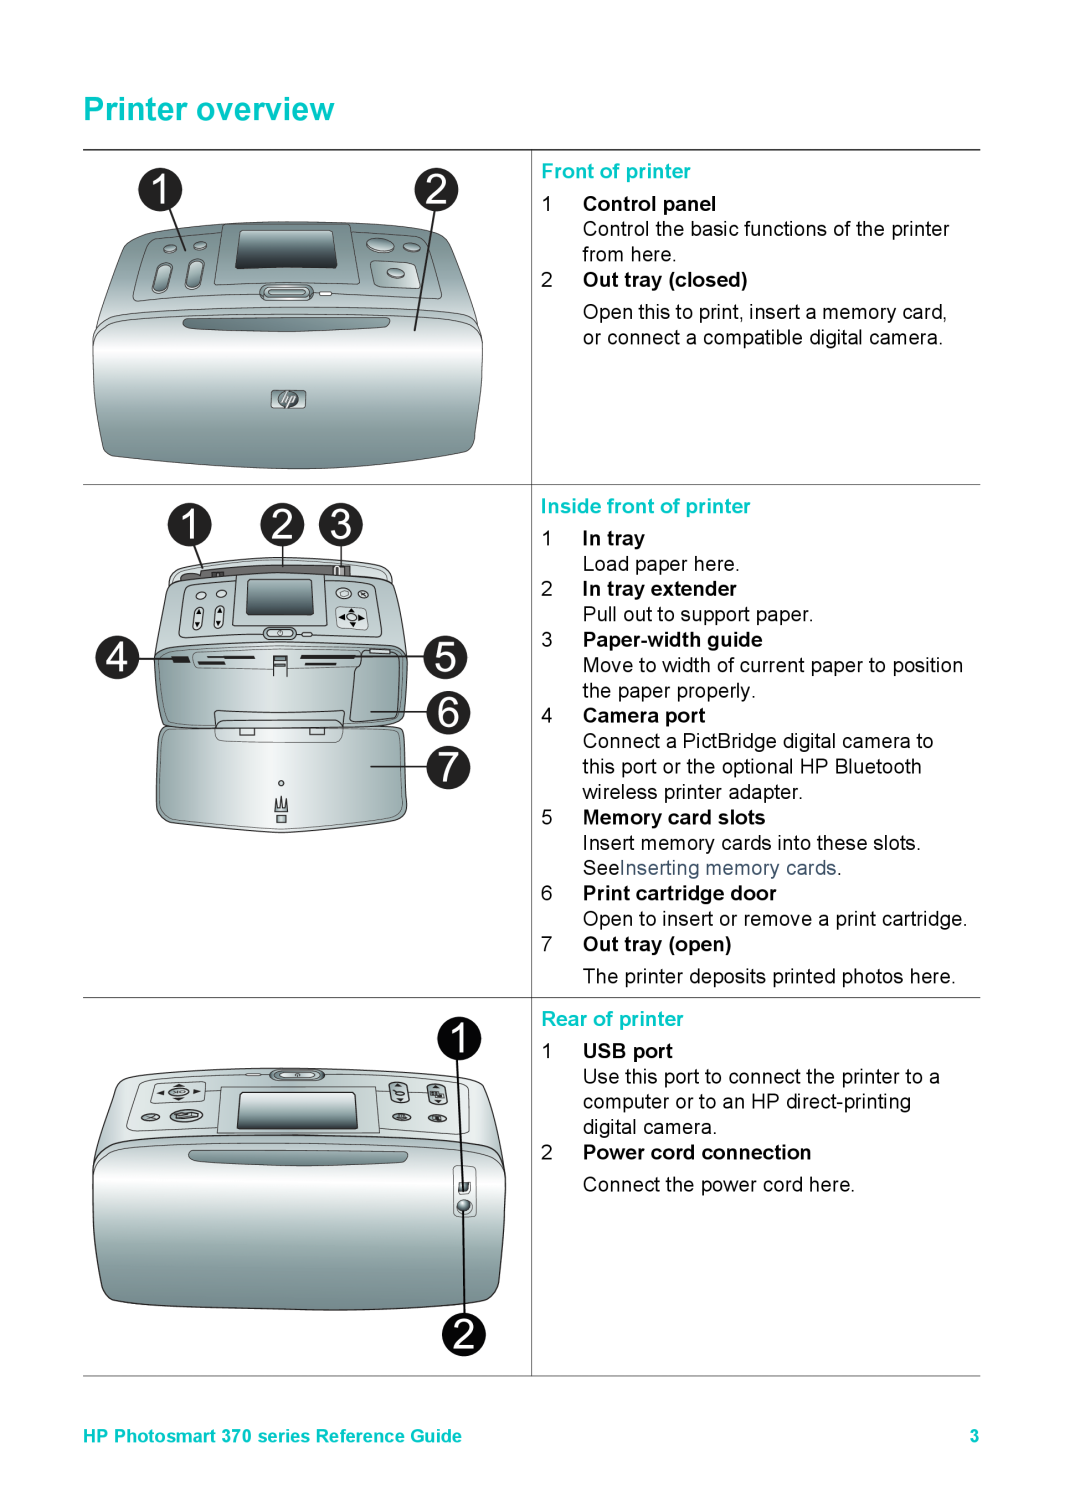 Olympus 370 series Printer overview, Front of printer, Control panel, Out tray closed, Inside front of printer 1 In tray 